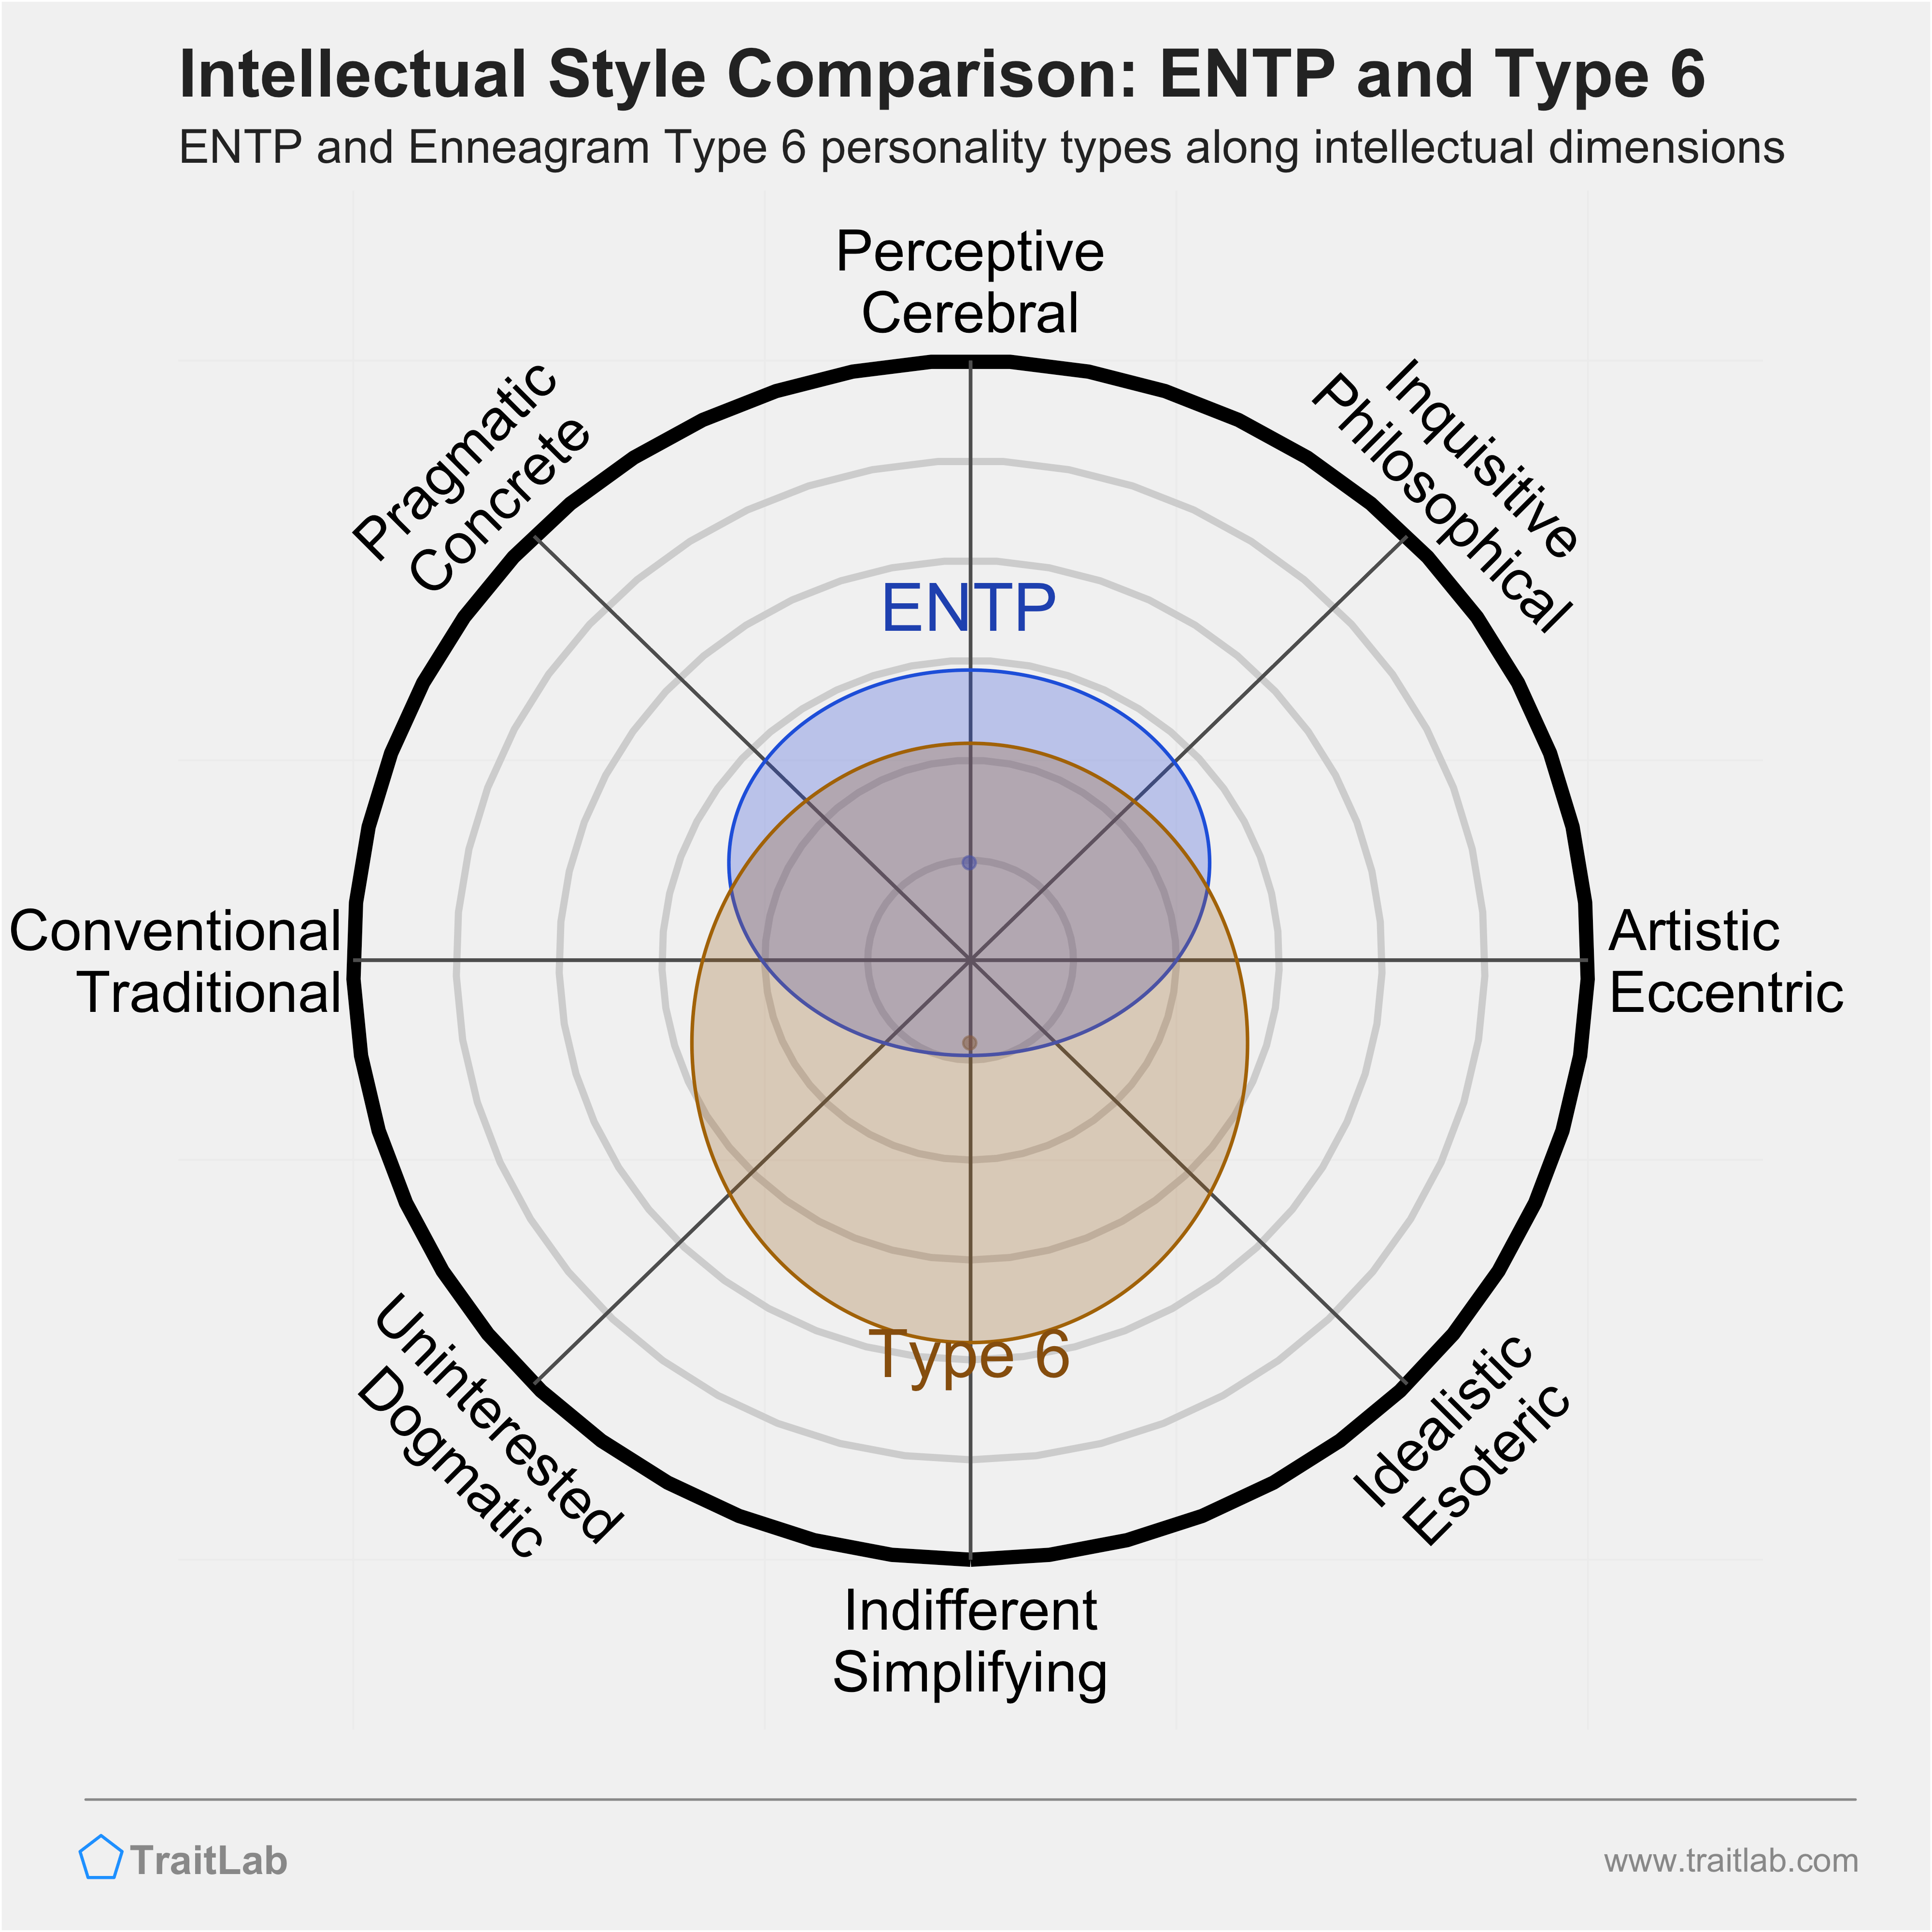 ENTP and Type 6 comparison across intellectual dimensions